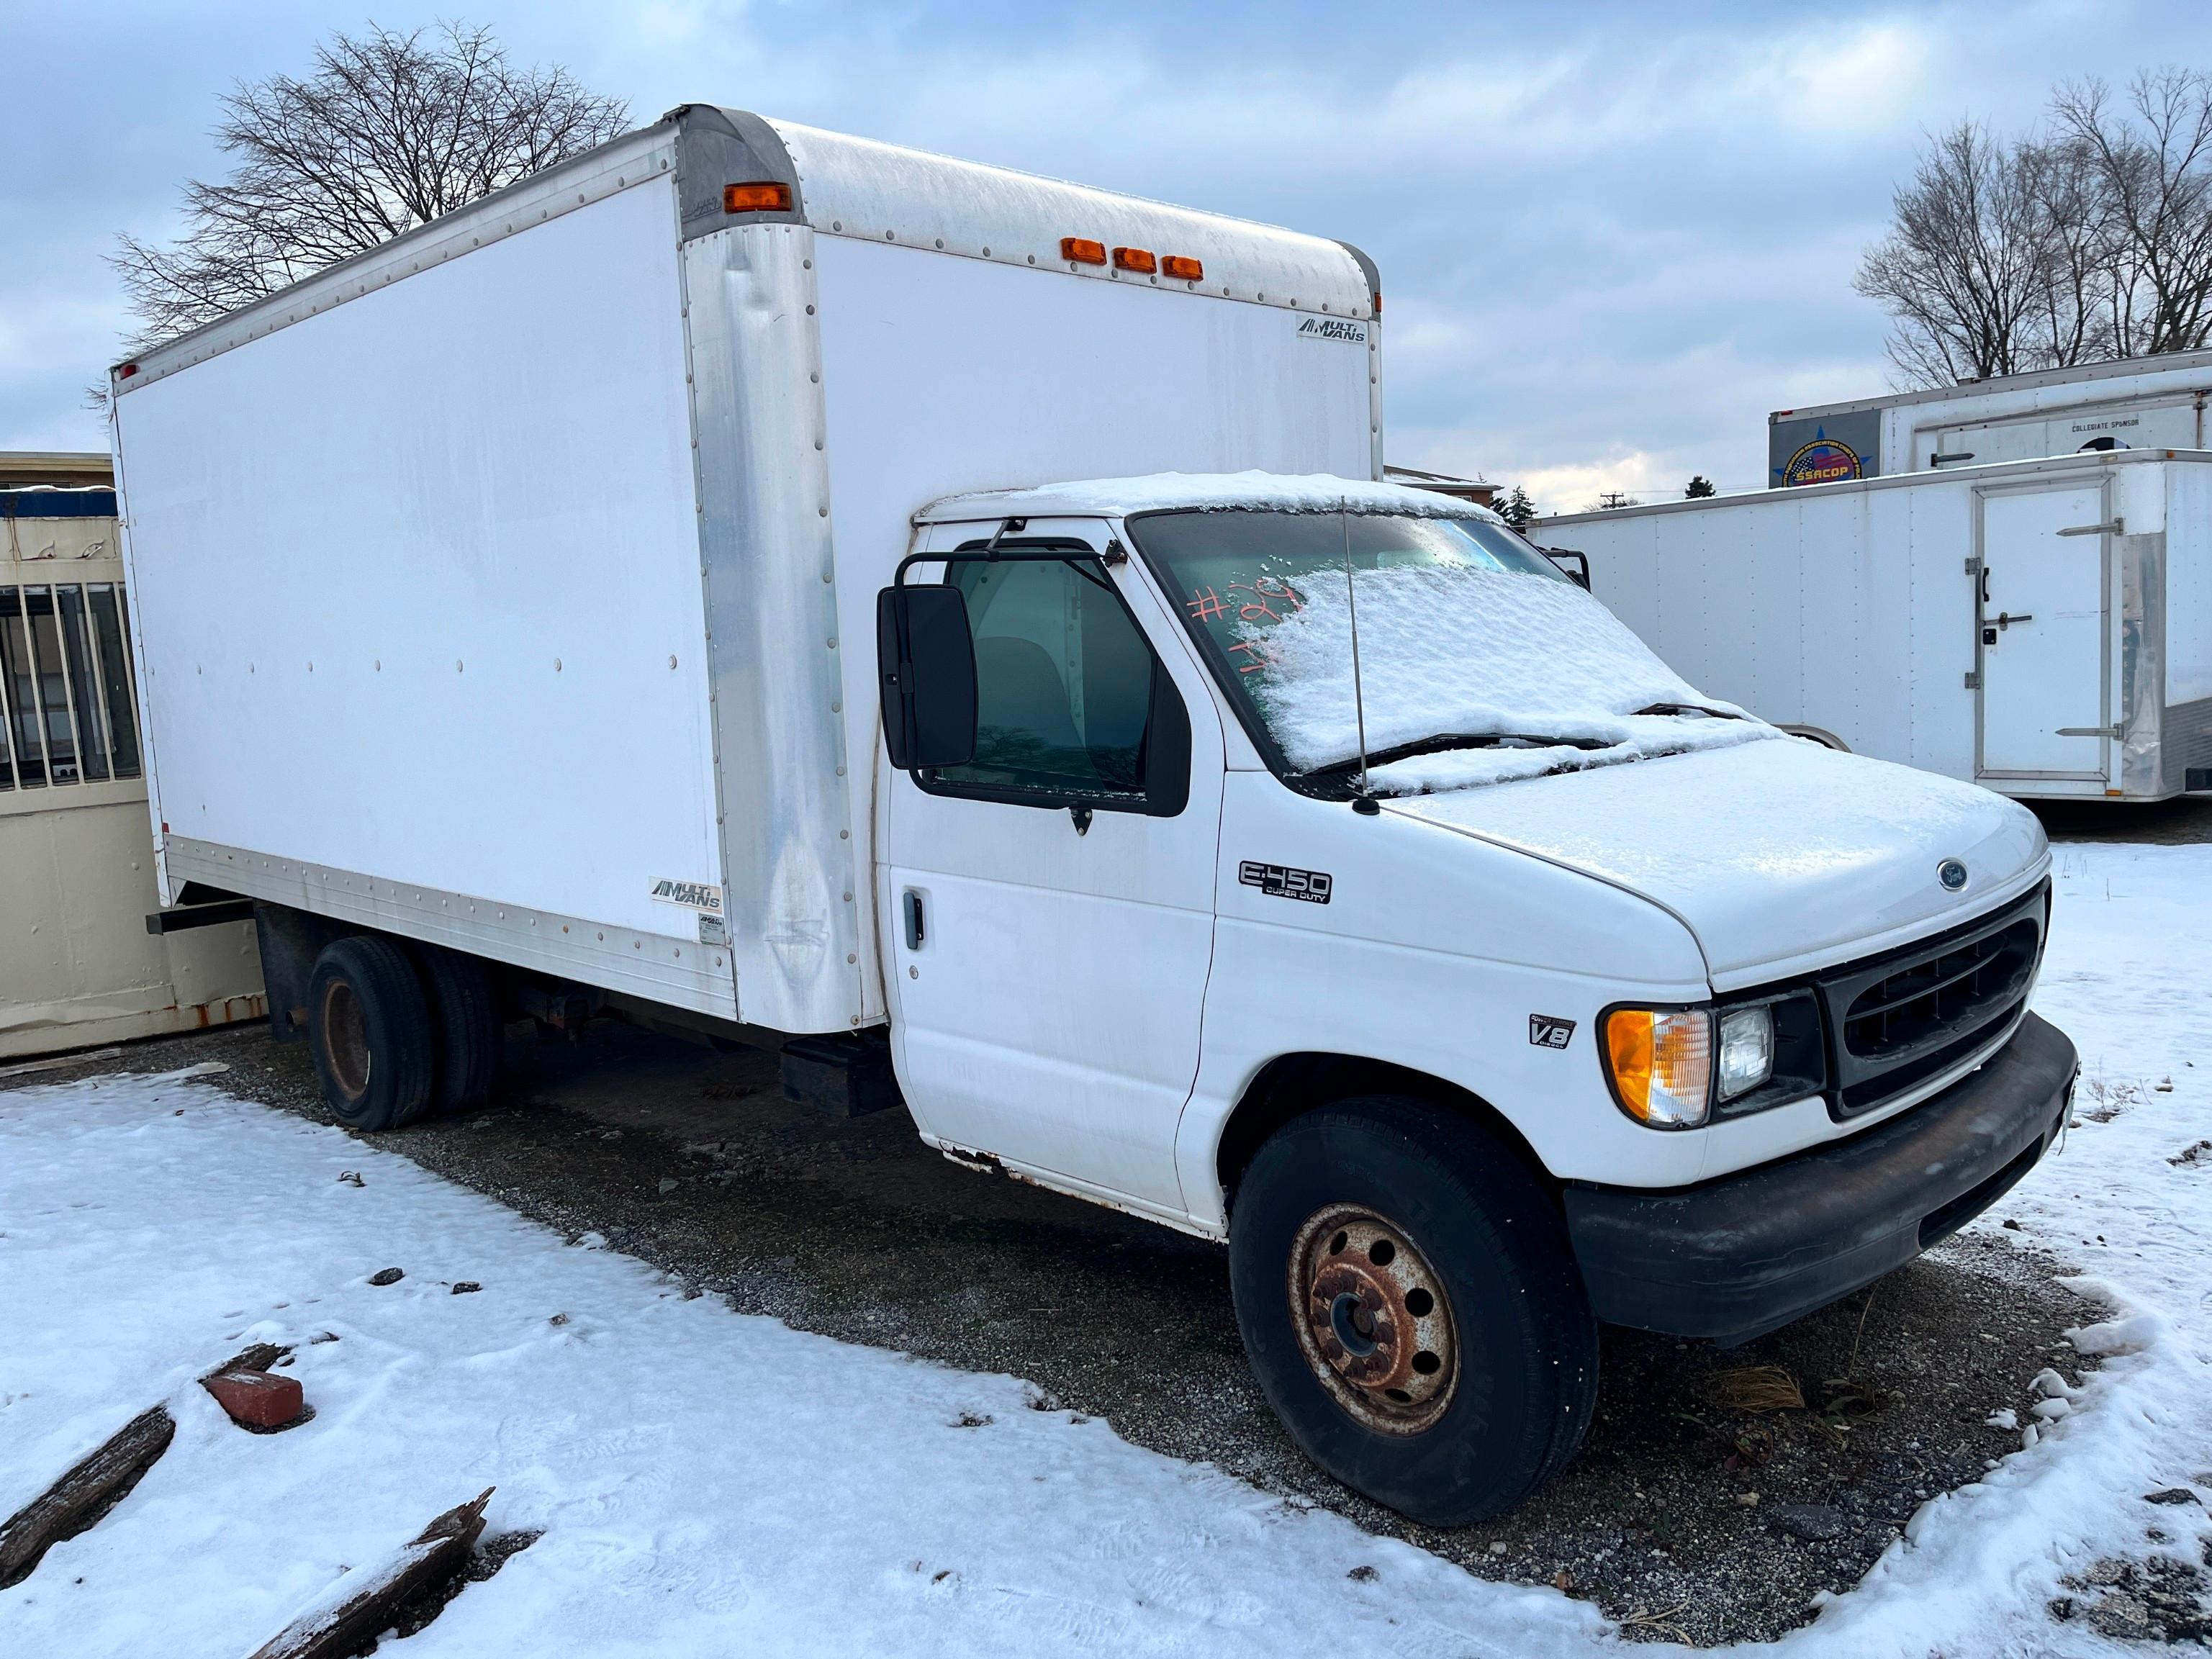 1999 FORD E450 VAN TRUCK VN:1FDXE47F1XHA42959 powered by Powerstroke V8 diesel engine, equipped with